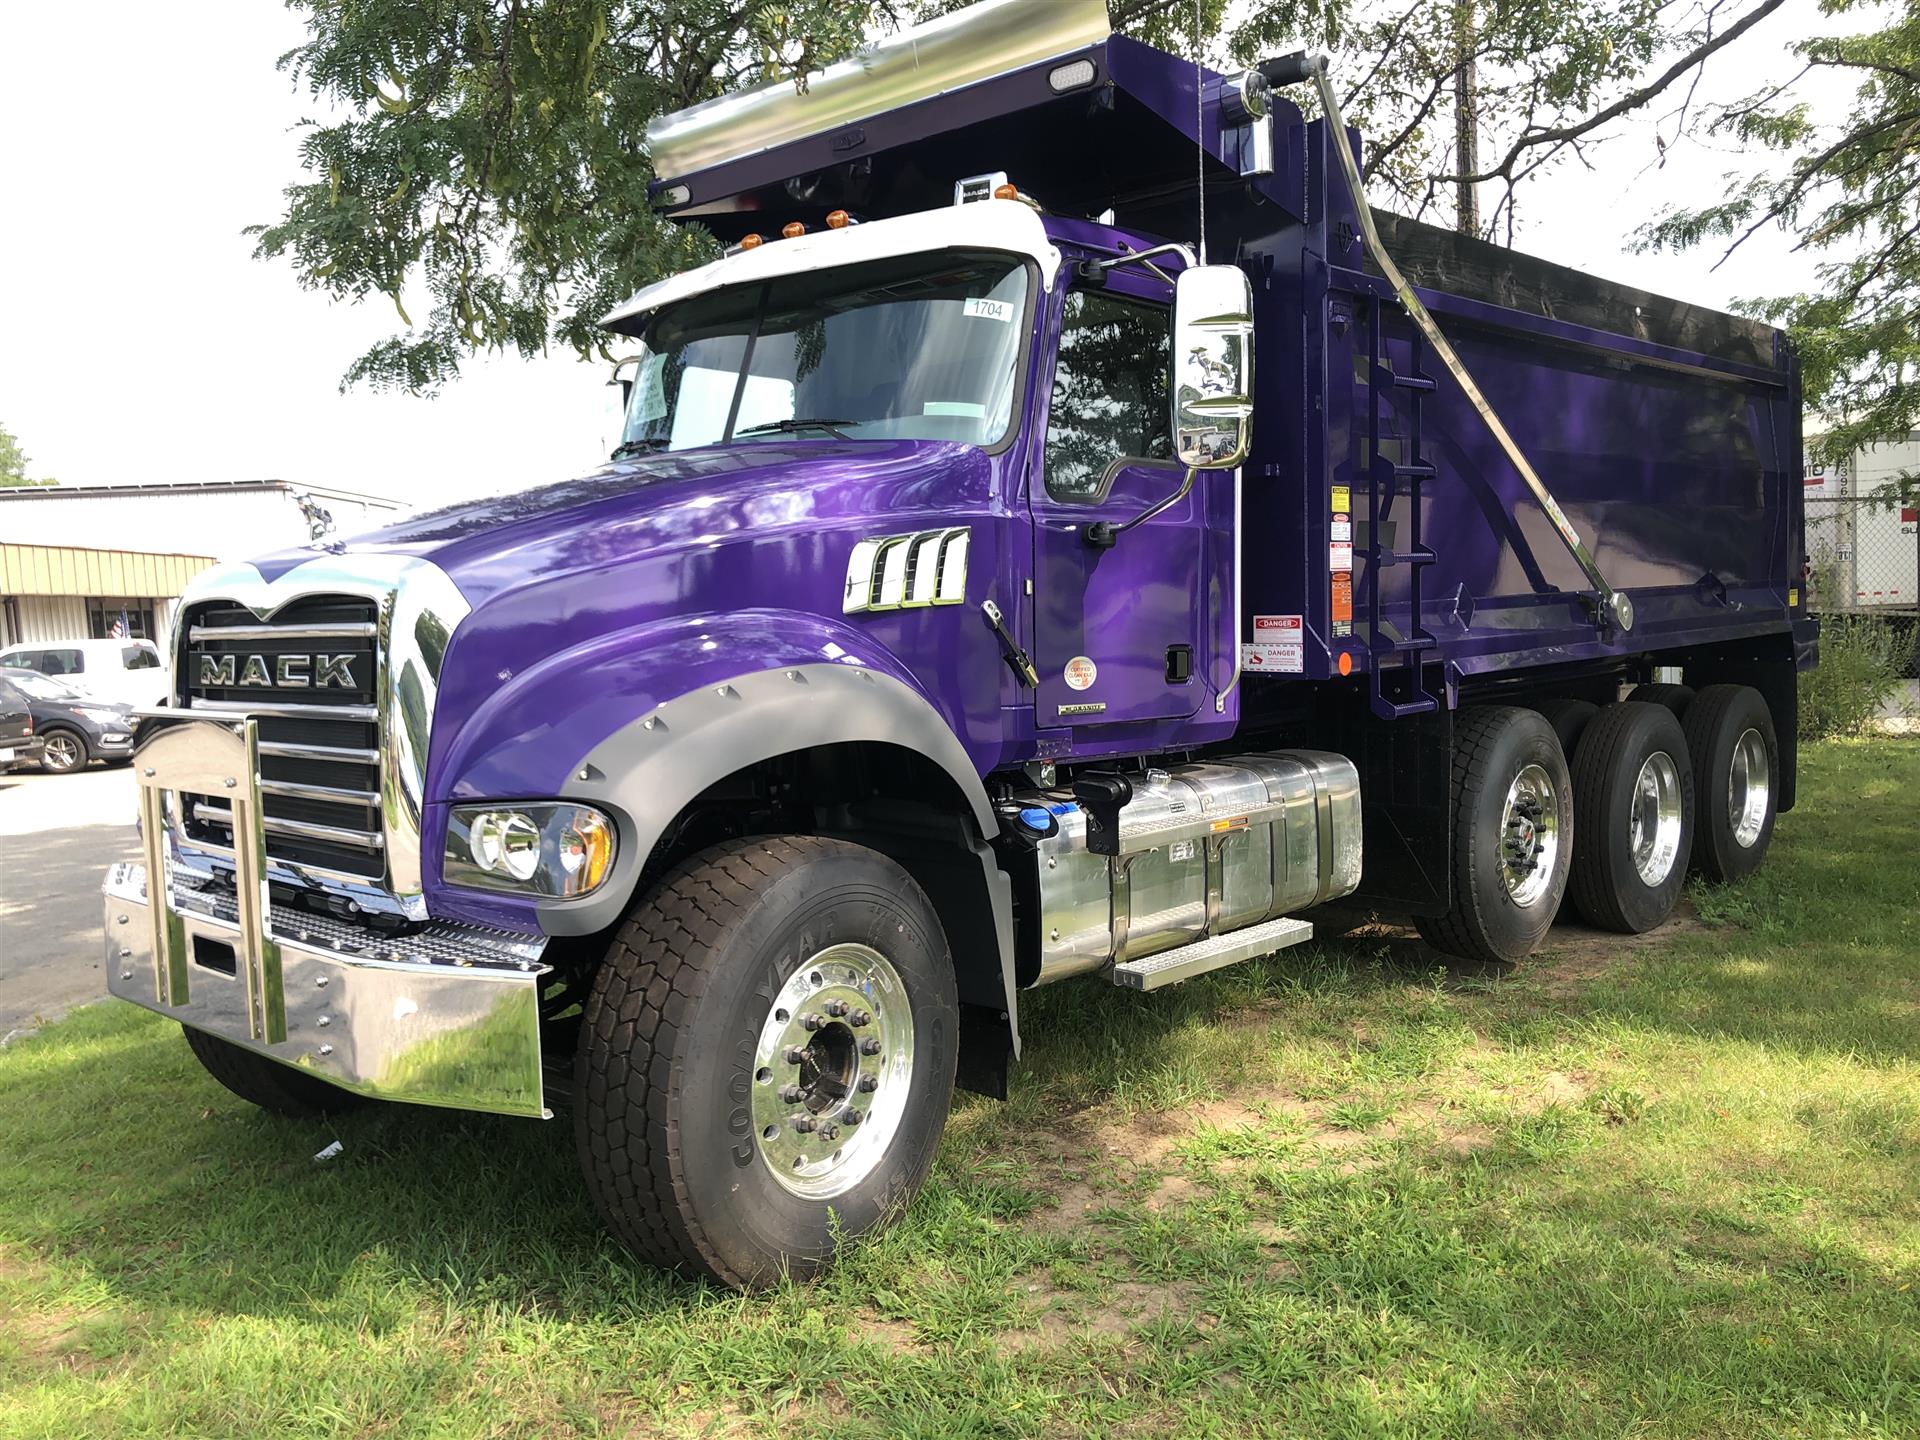 used mack trucks for sale in new jersey